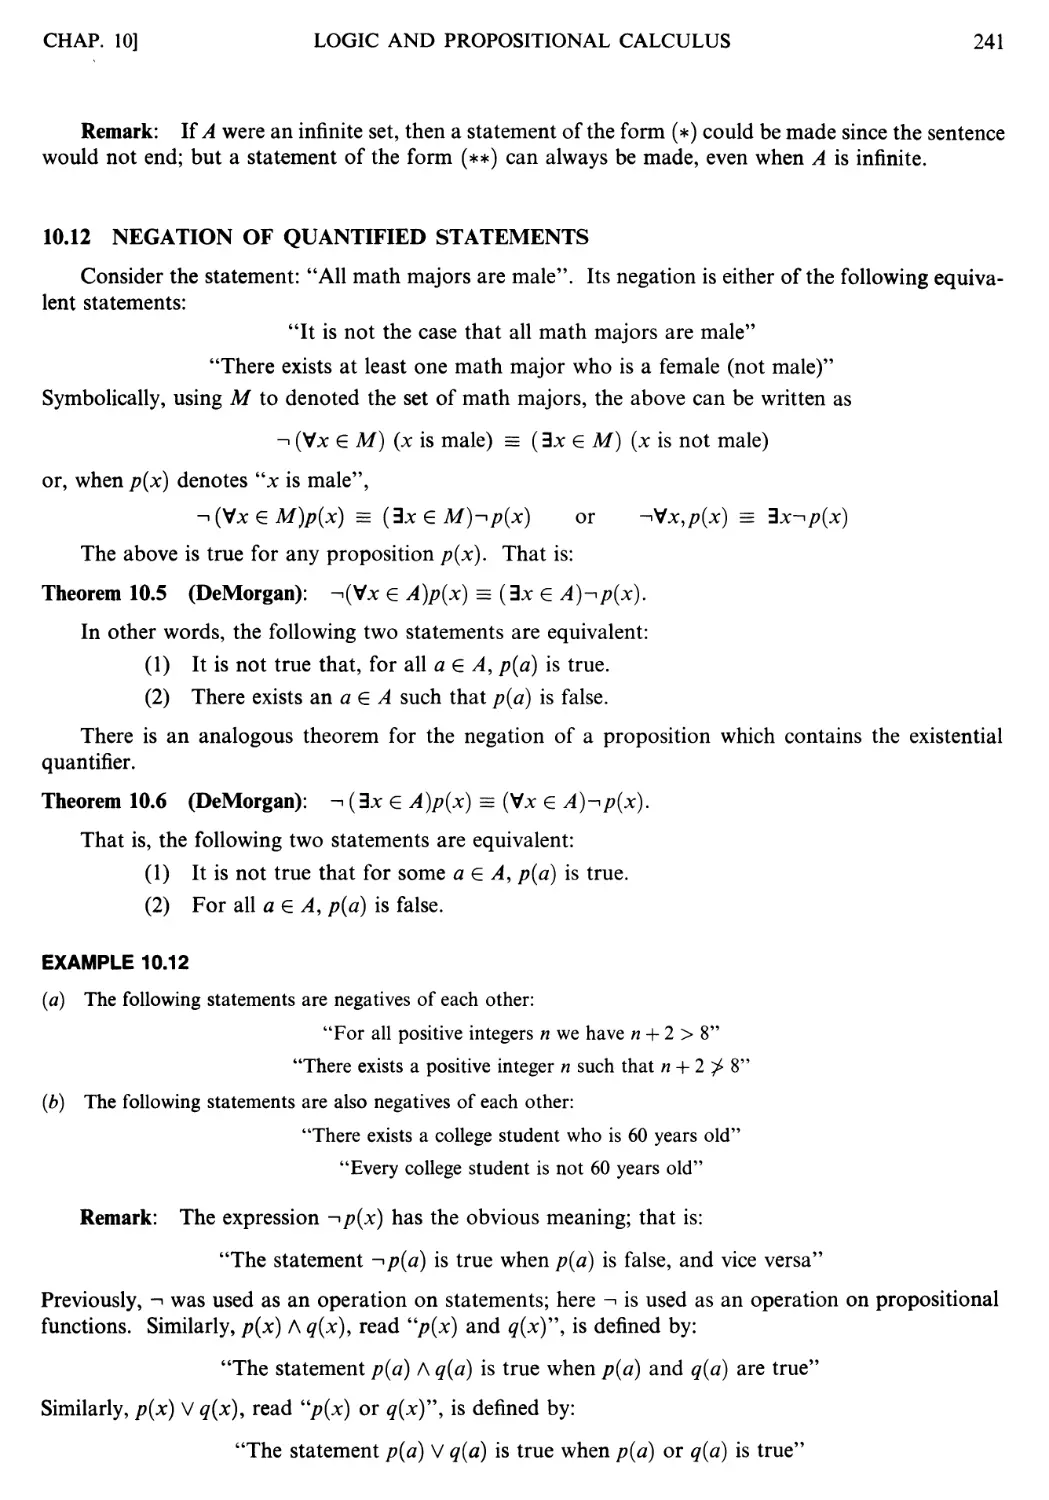 10.12 Negation of quantified statements